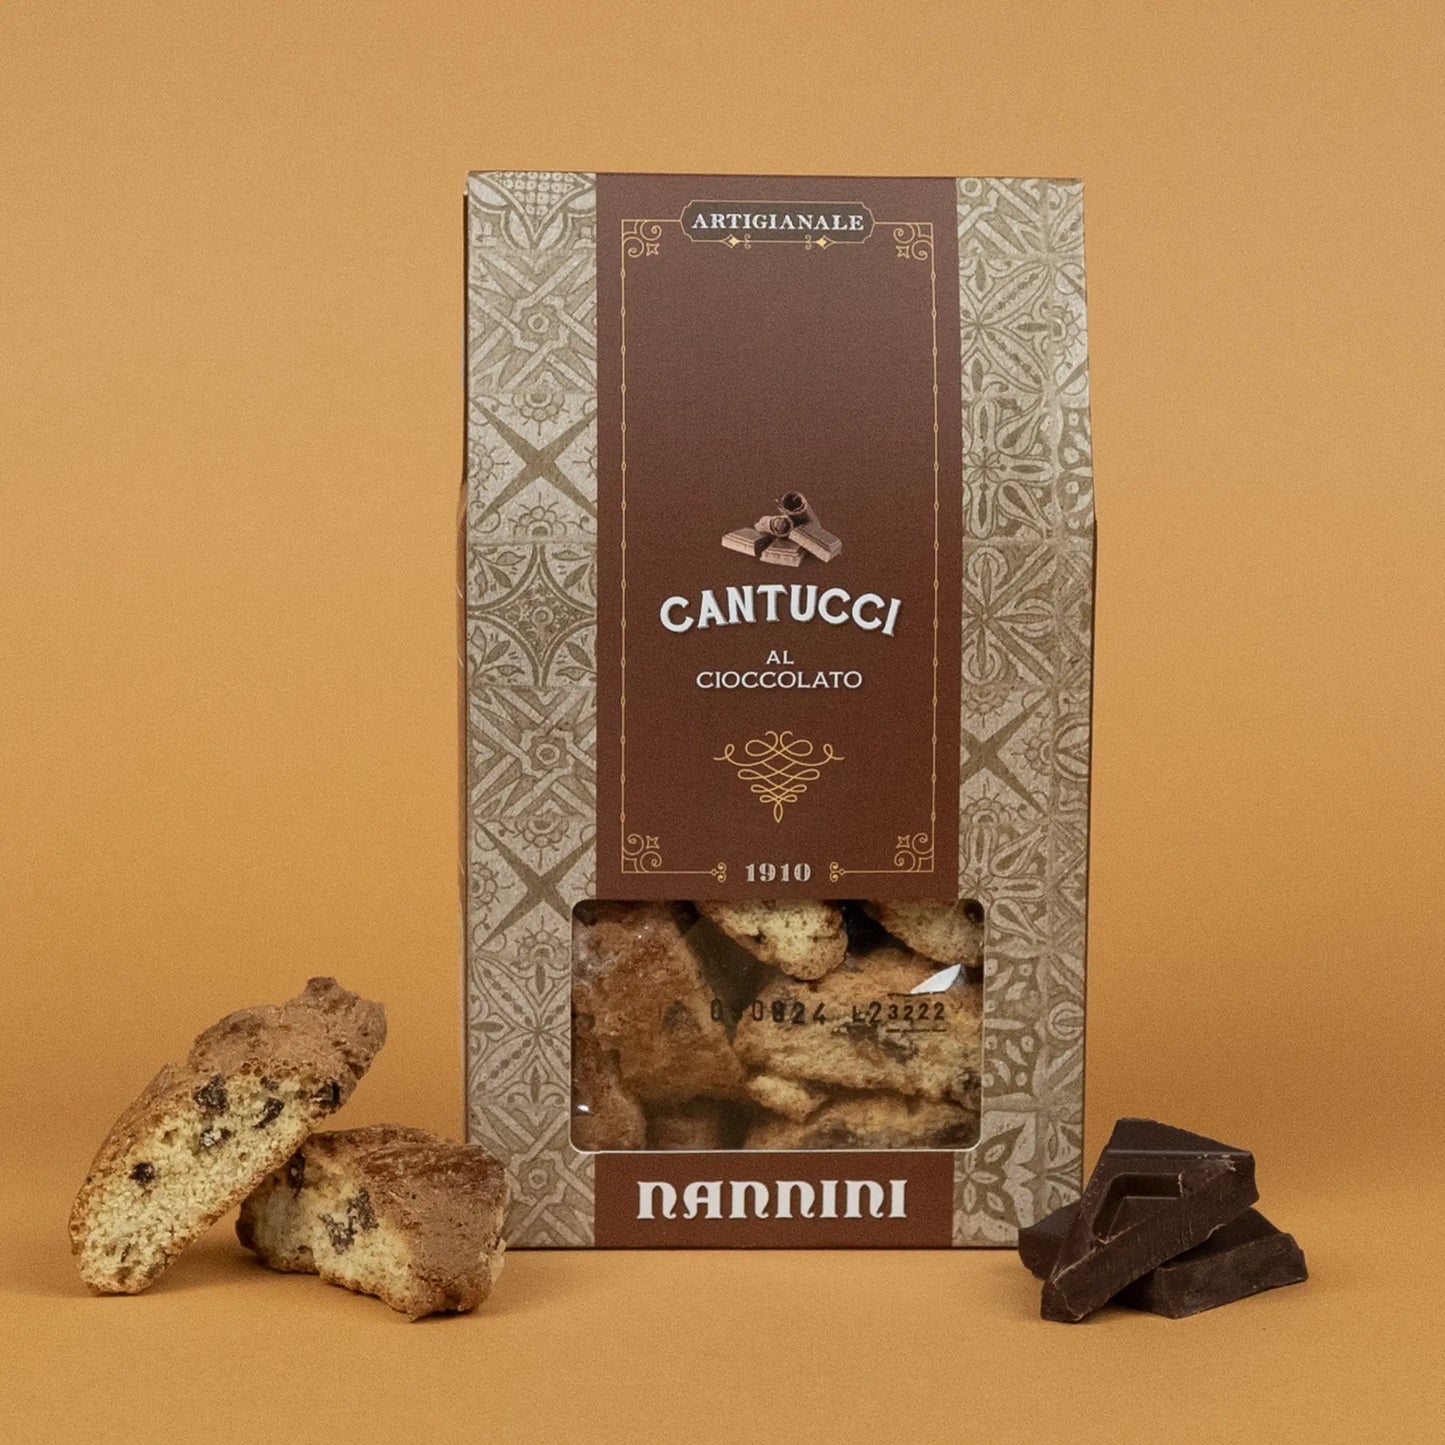 Cantucci with Chocolate